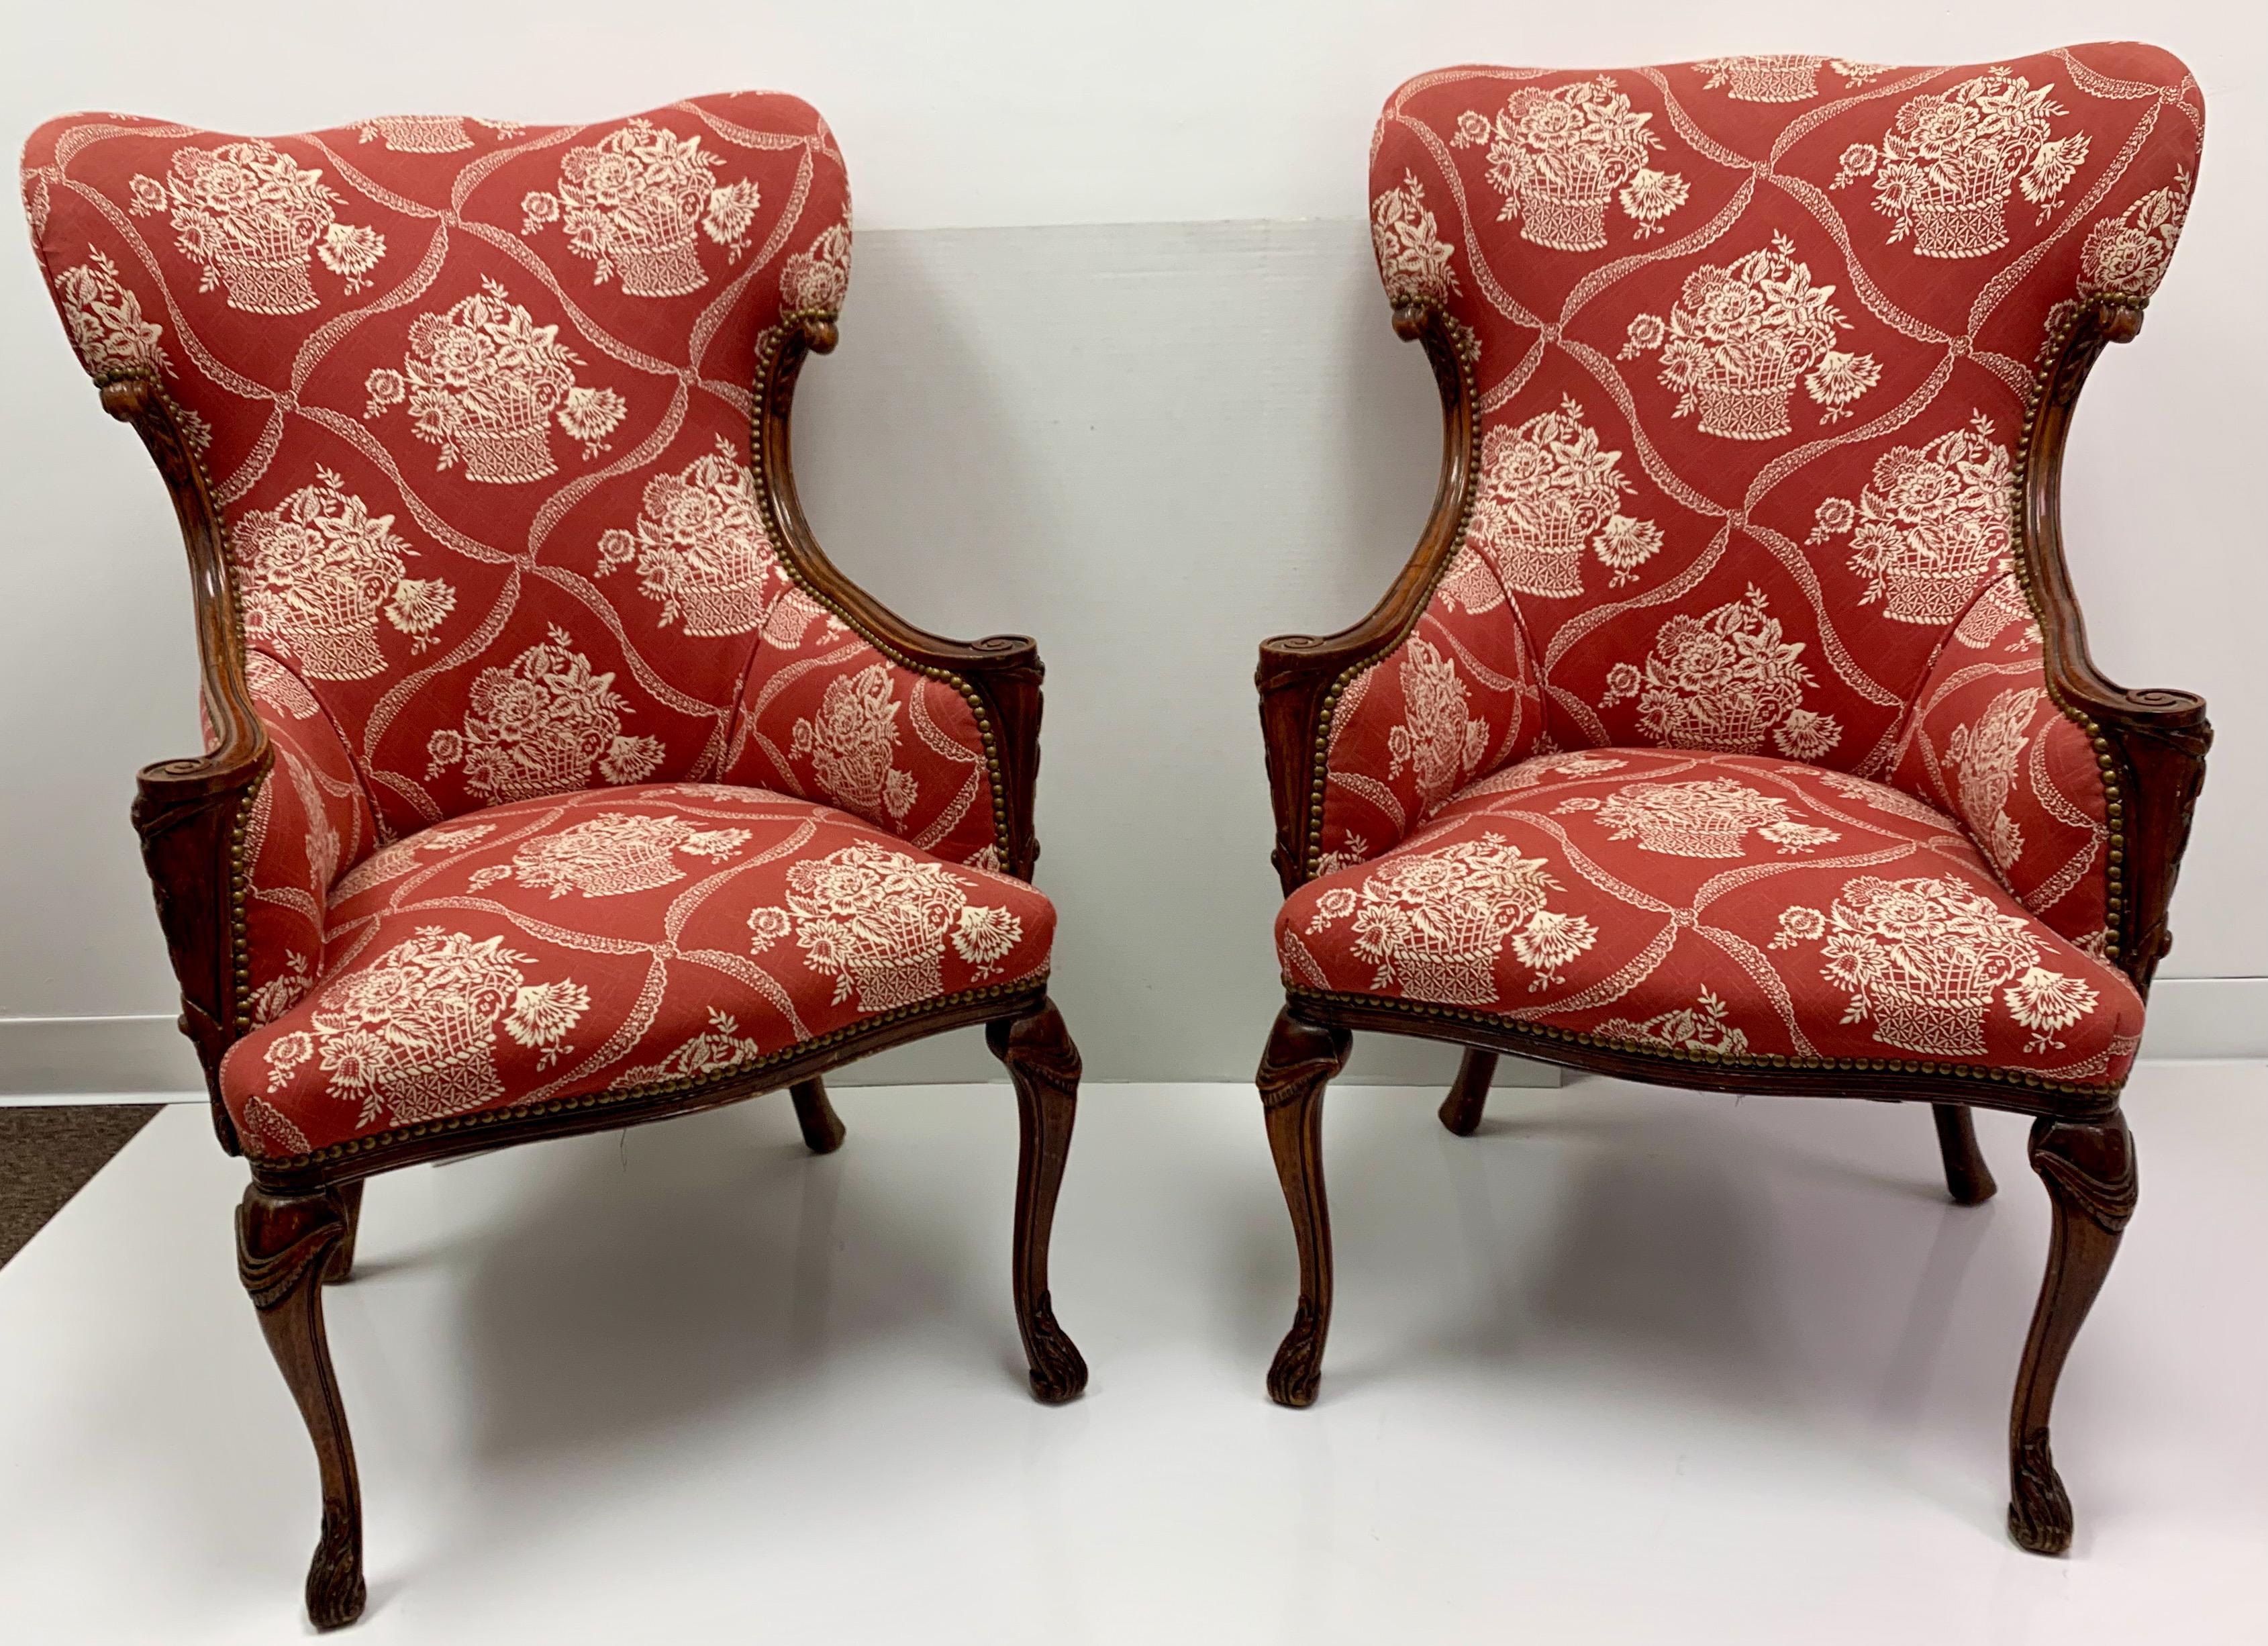 Antique French Carved Mahogany Wing Chairs in Schumacher Fabric, Pair In Good Condition For Sale In Kennesaw, GA